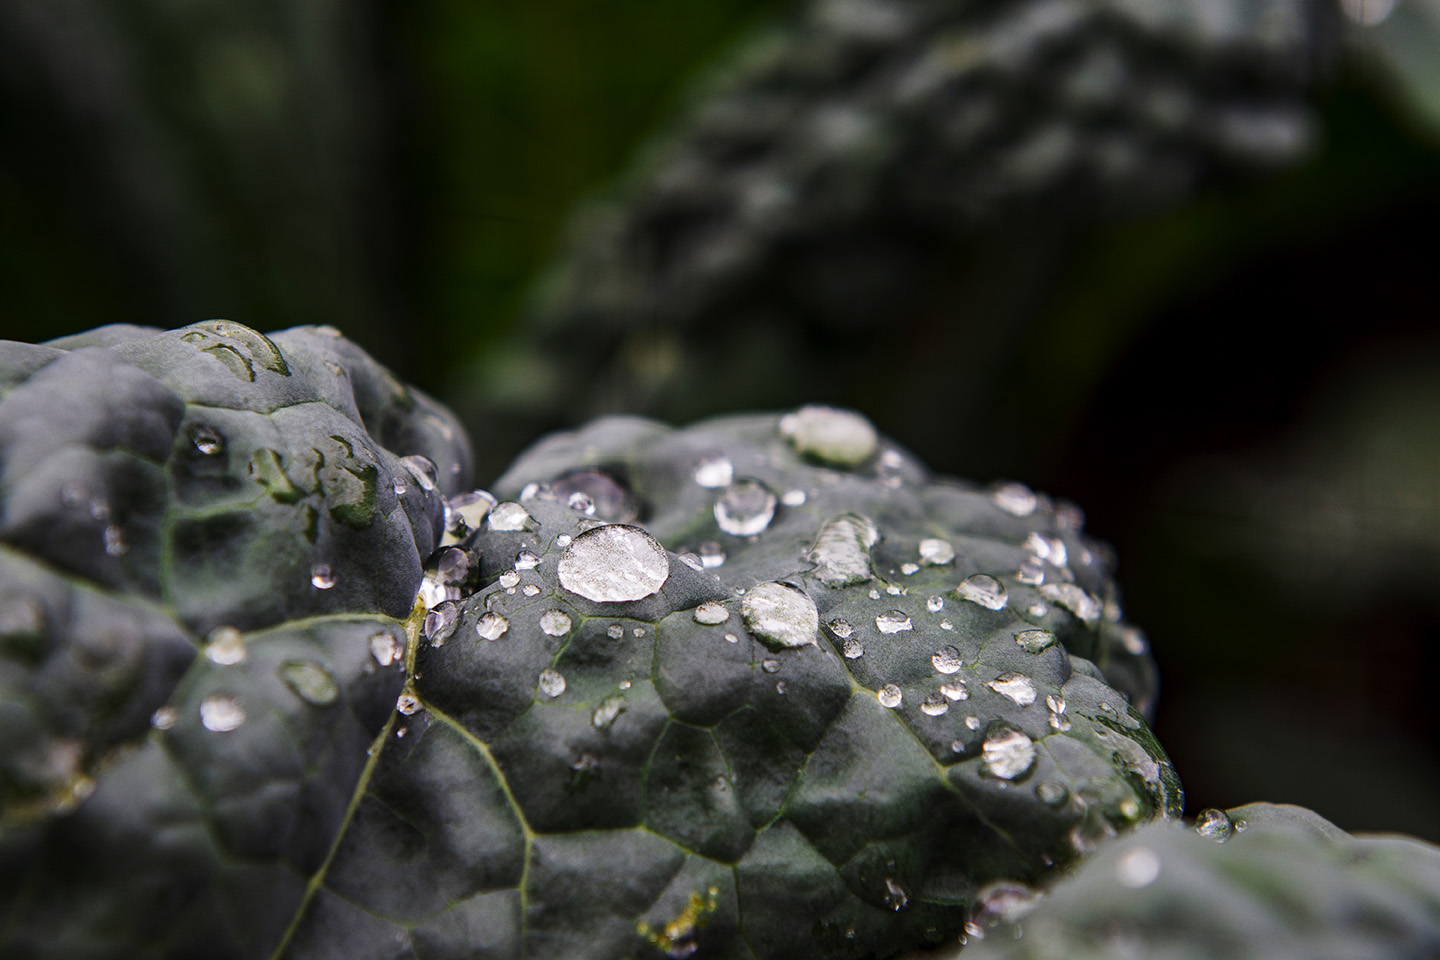 Image shows a close up of silvery water droplets on cavolo nero leaves